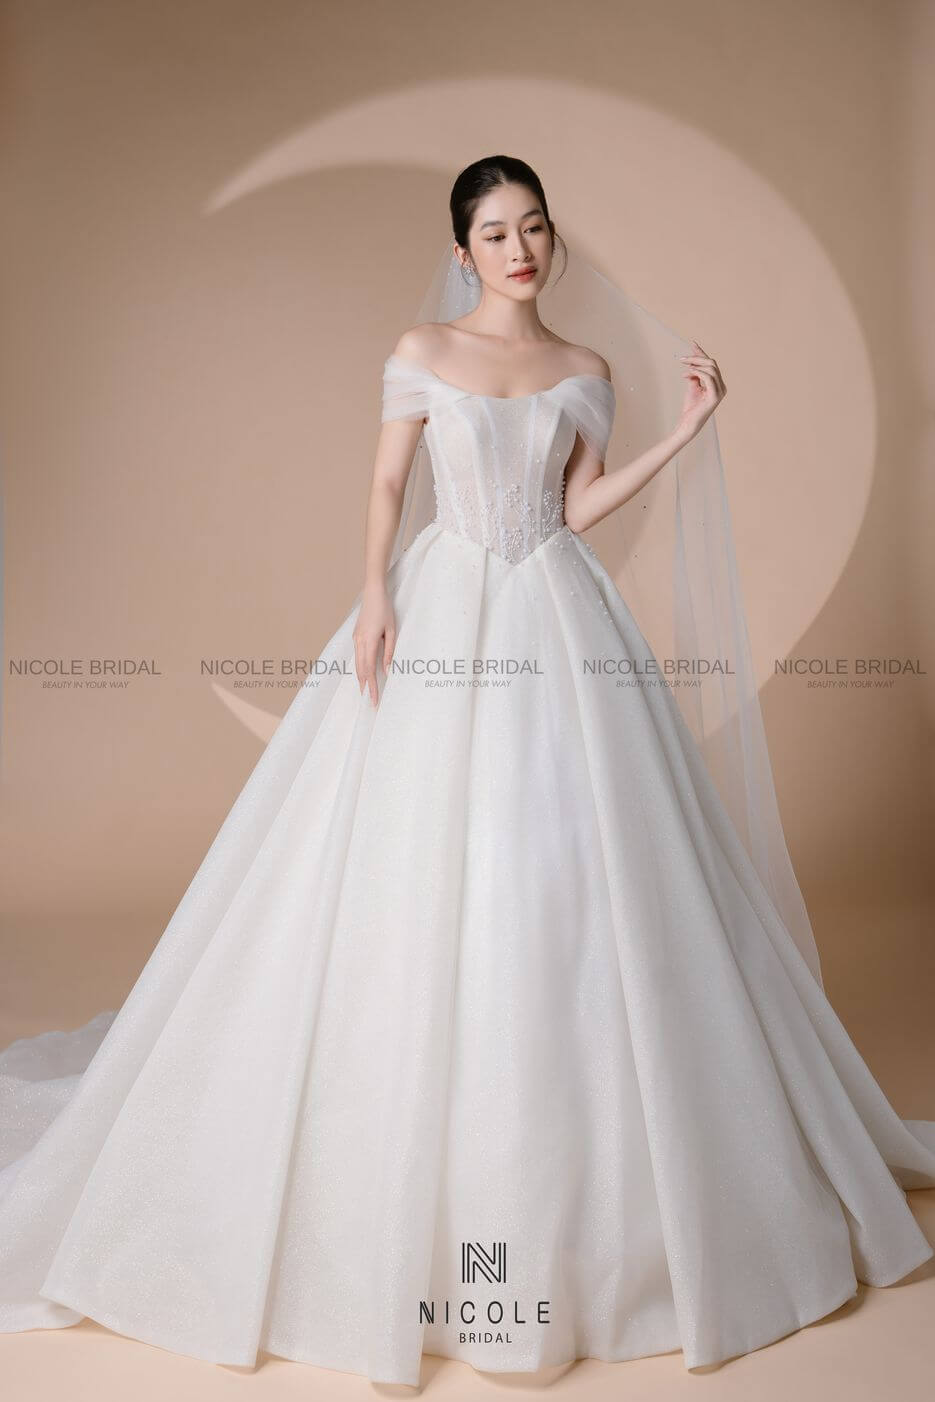 Nicole Bridal - Designing, Tailoring, and luxury wedding attire for rent